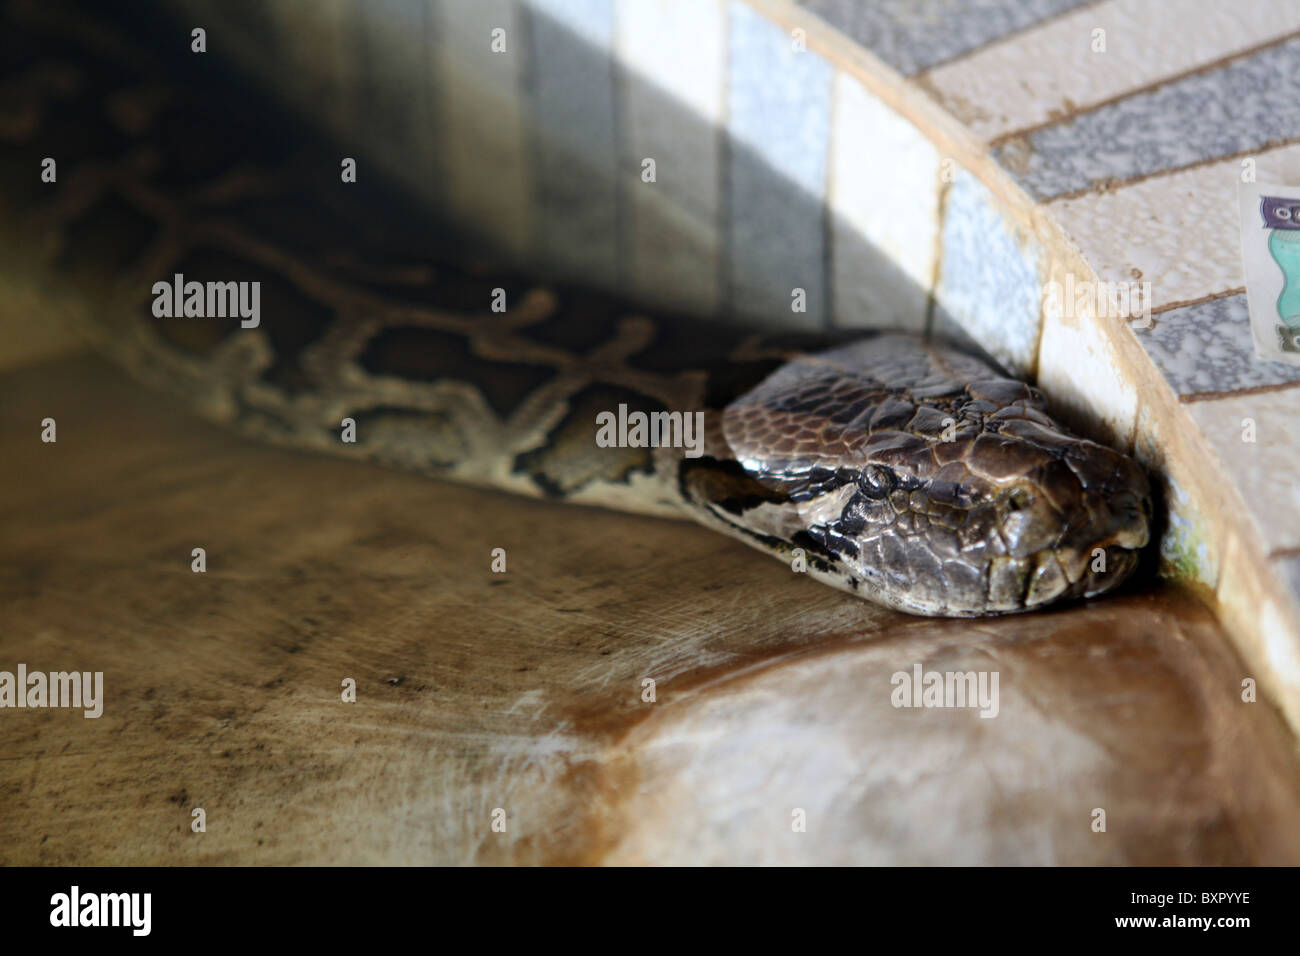 A 115 year old Boa Constrictor, the re-incarnation of the head of a monastery at the Snake Temple in Bago, Myanmar. (Burma) Stock Photo